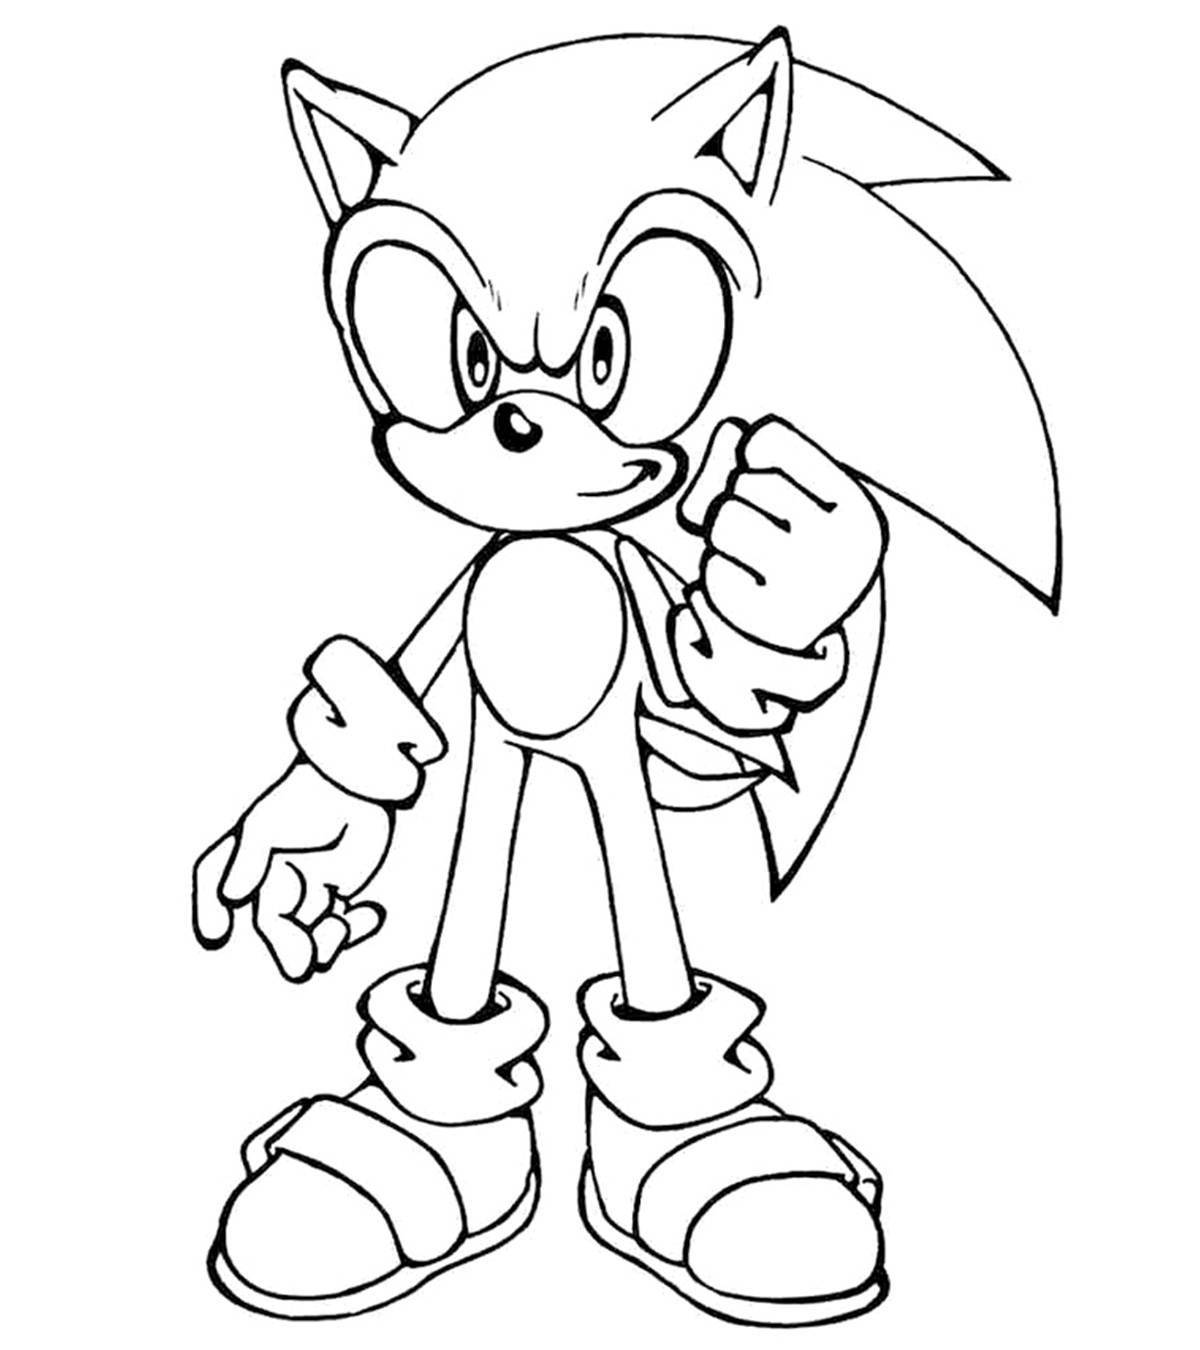 Fascinating sonic x coloring book